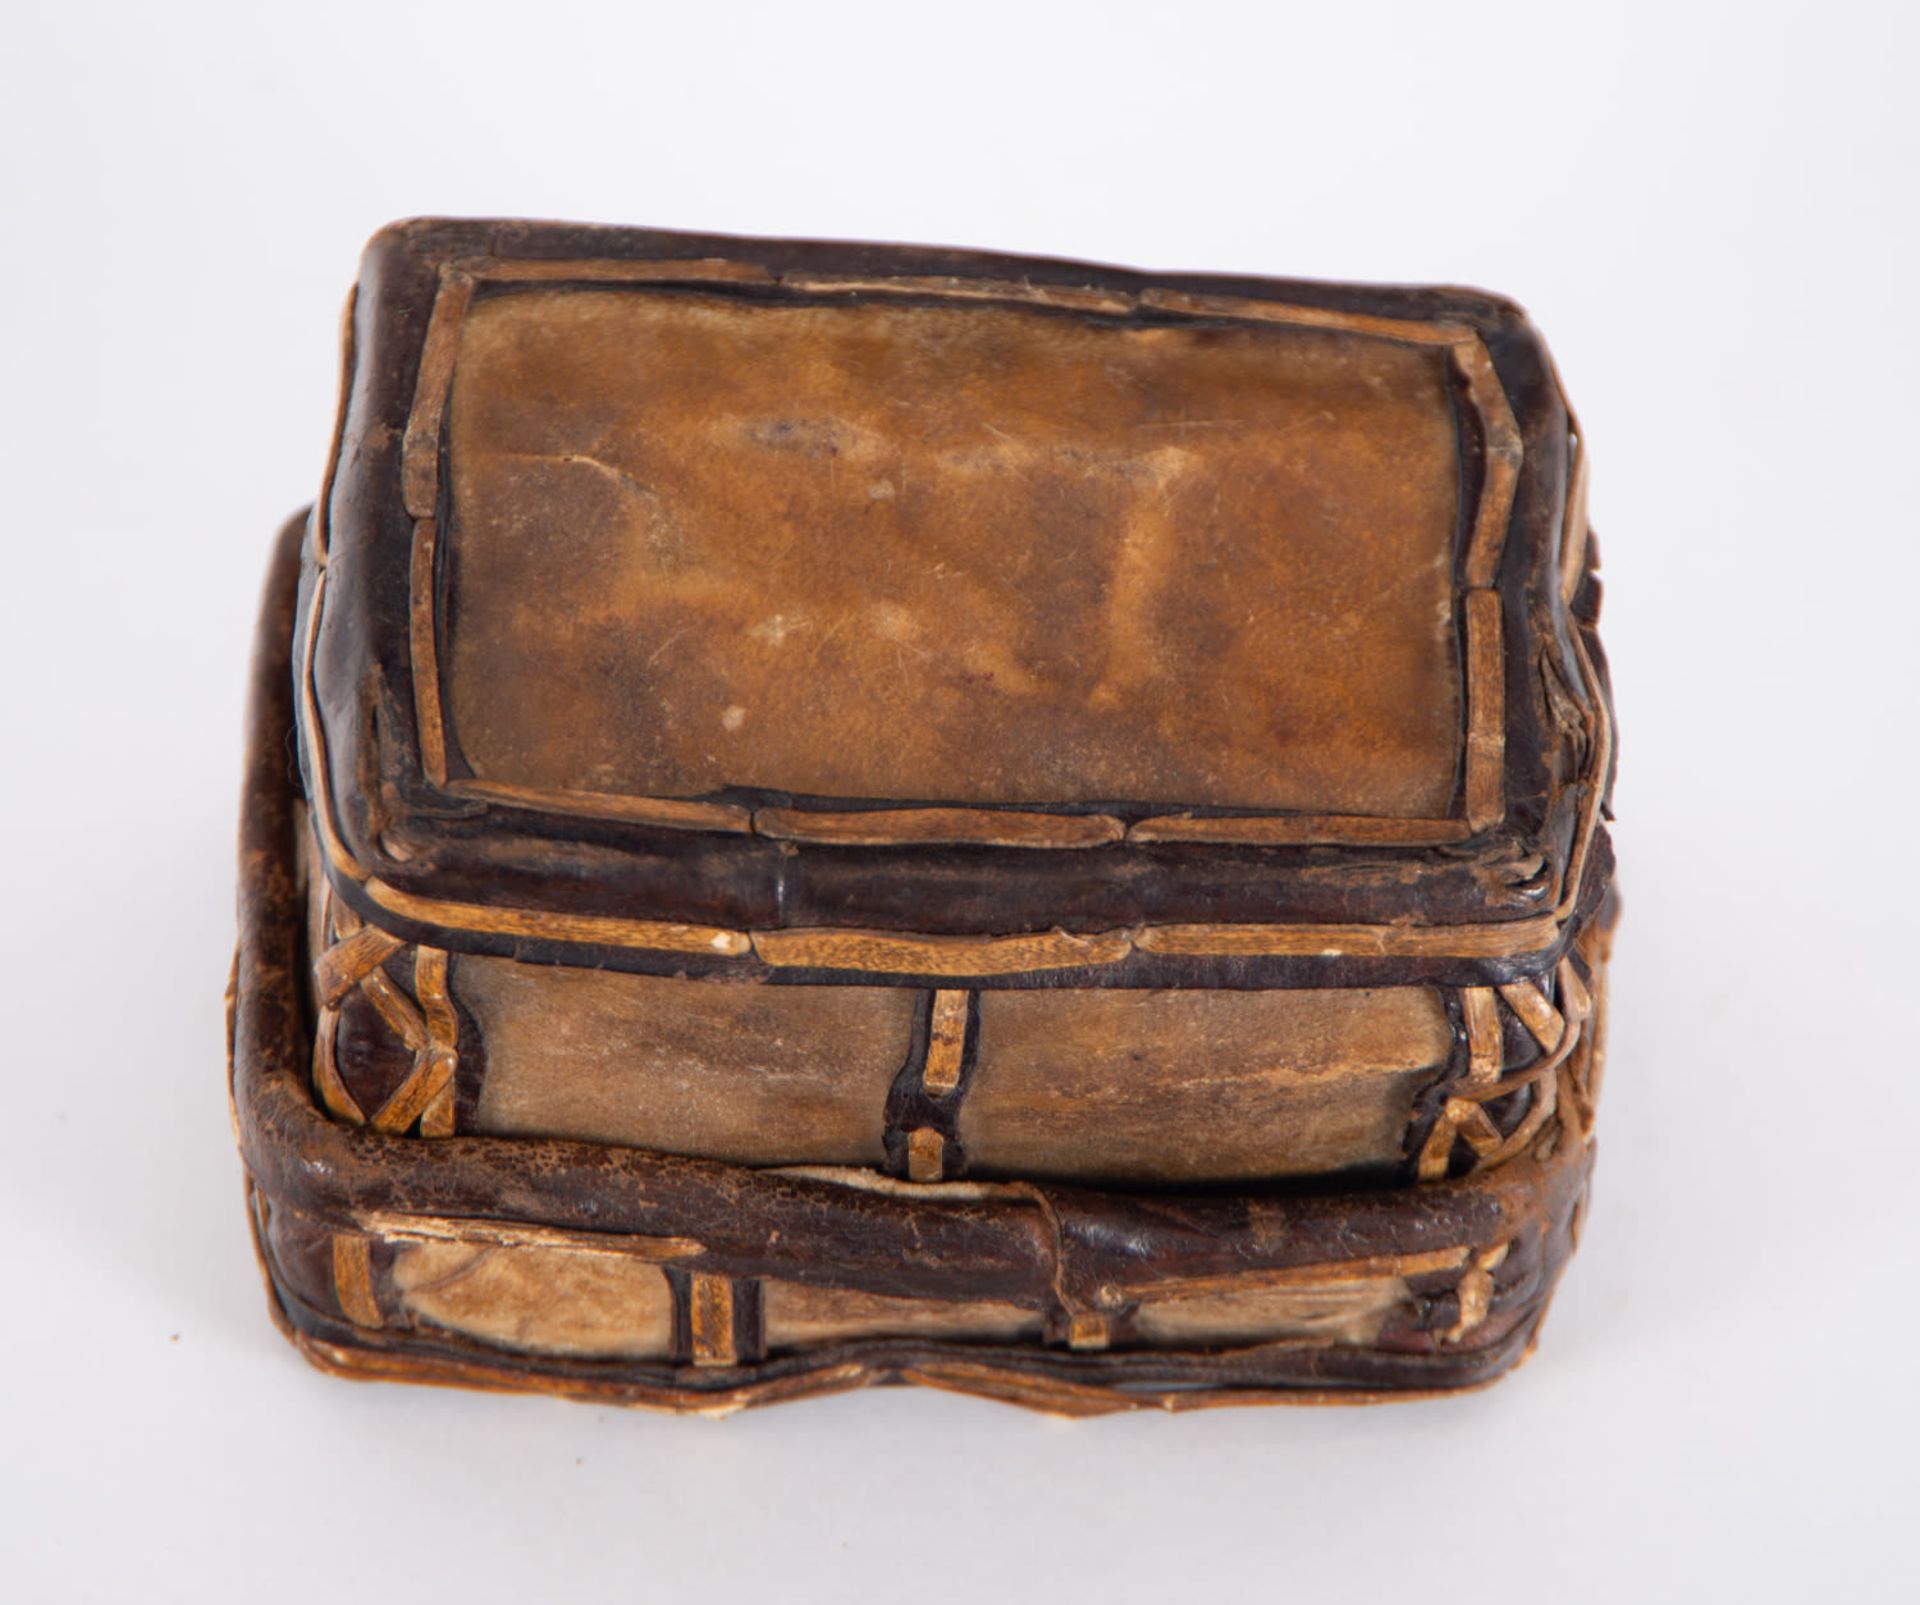 Small Mexican leather chest, 17th century - Image 5 of 7